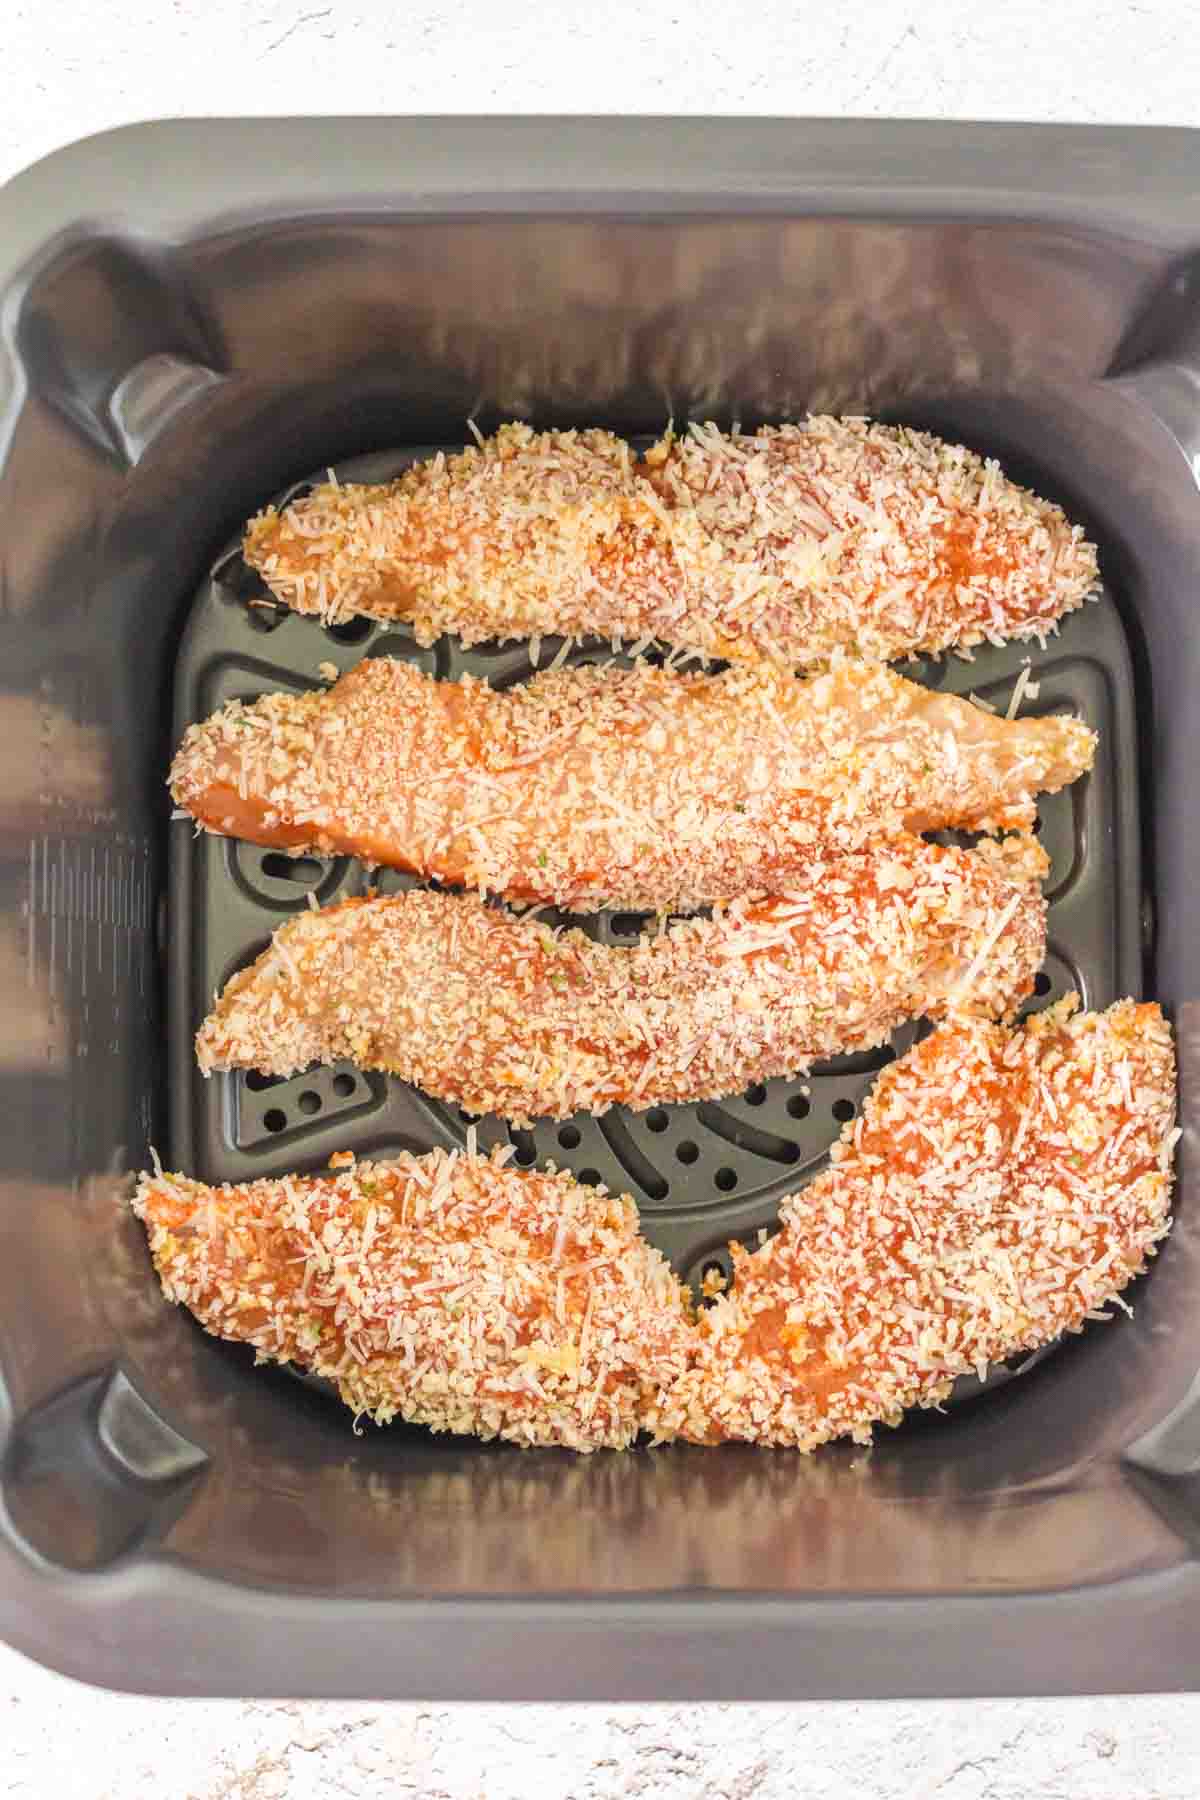 raw and breaded chicken in the air fryer